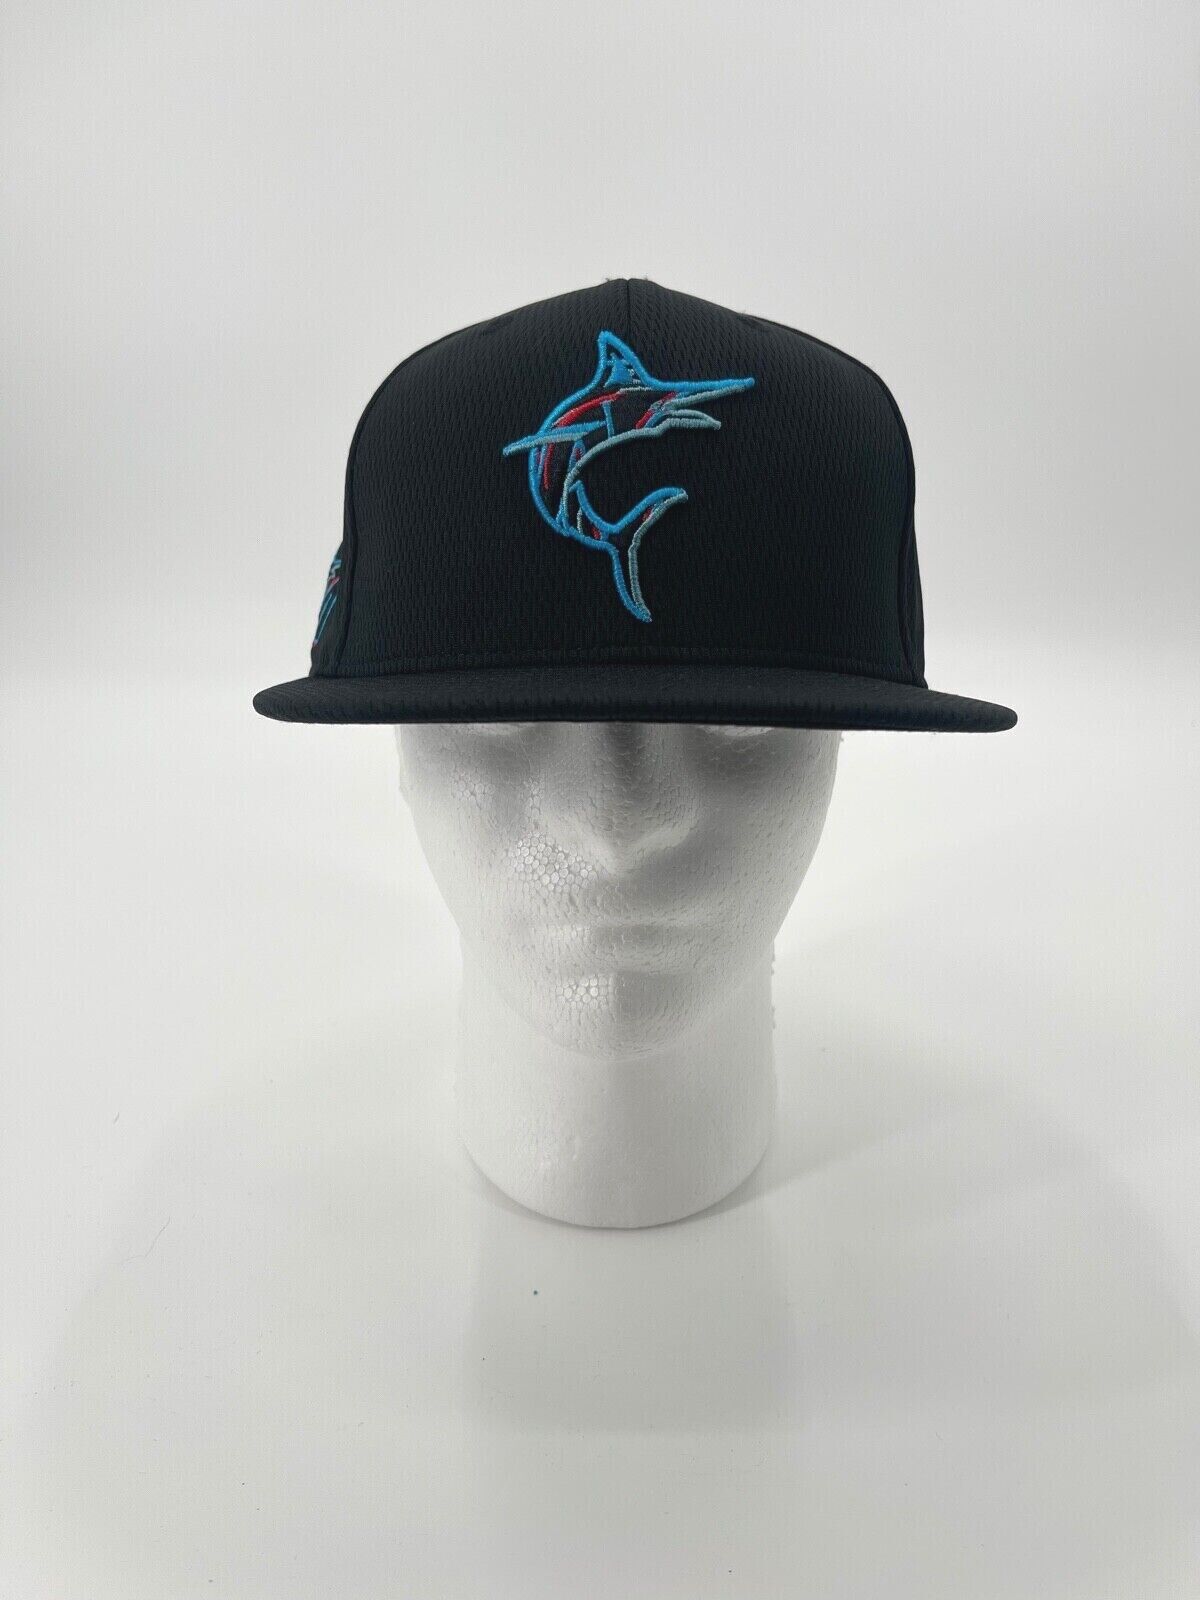 MIAMI MARLINS 2021 SPRING TRAINING PATCH BP NEW ERA HAT BRAND NEW ALL SIZES